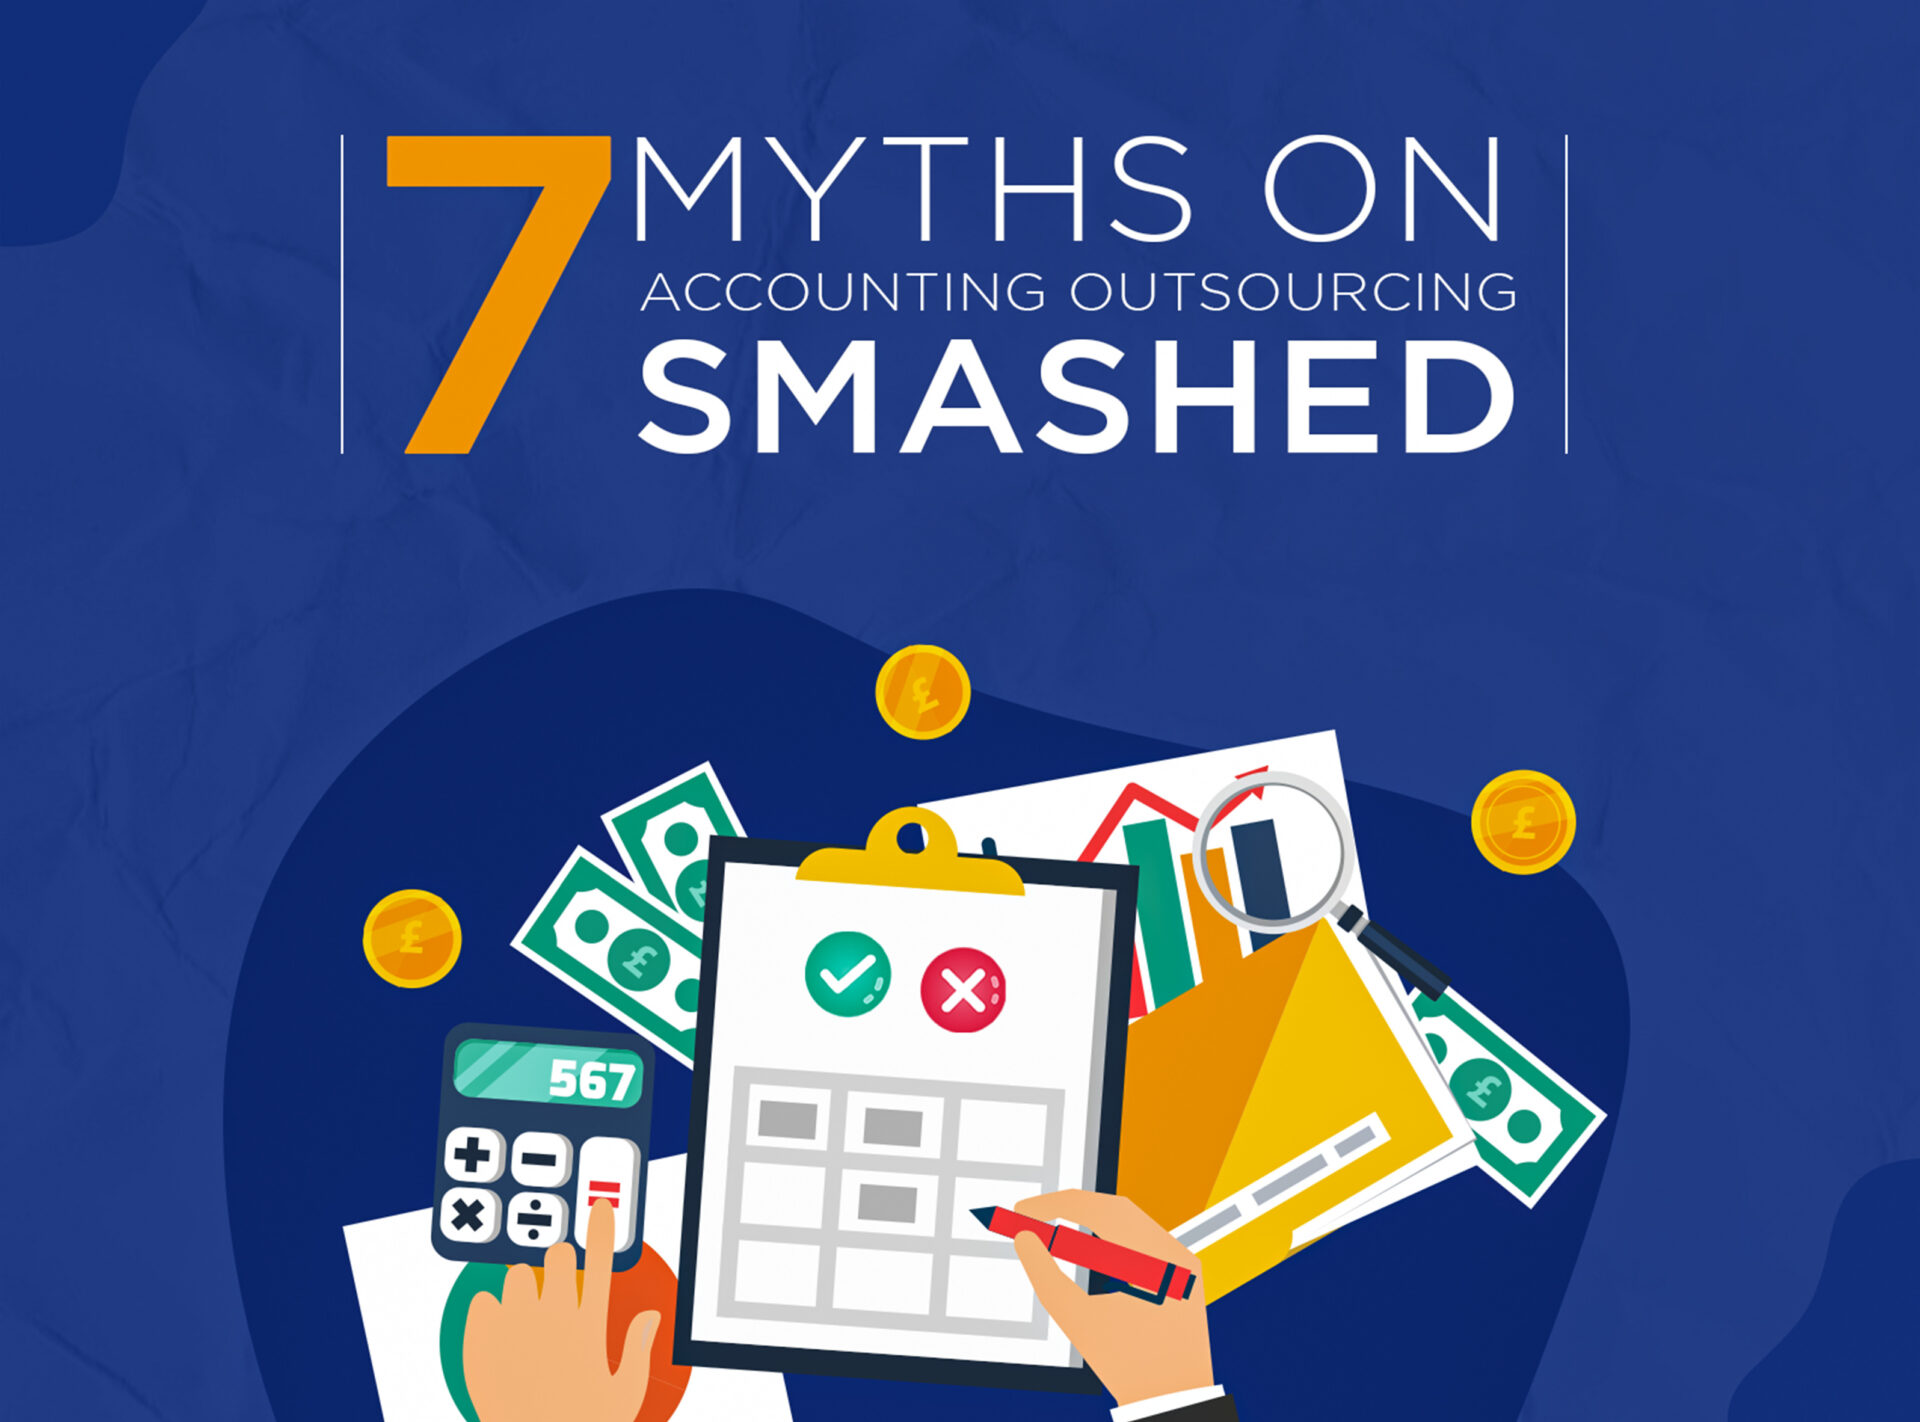 7 Myths on accounting outsourcing